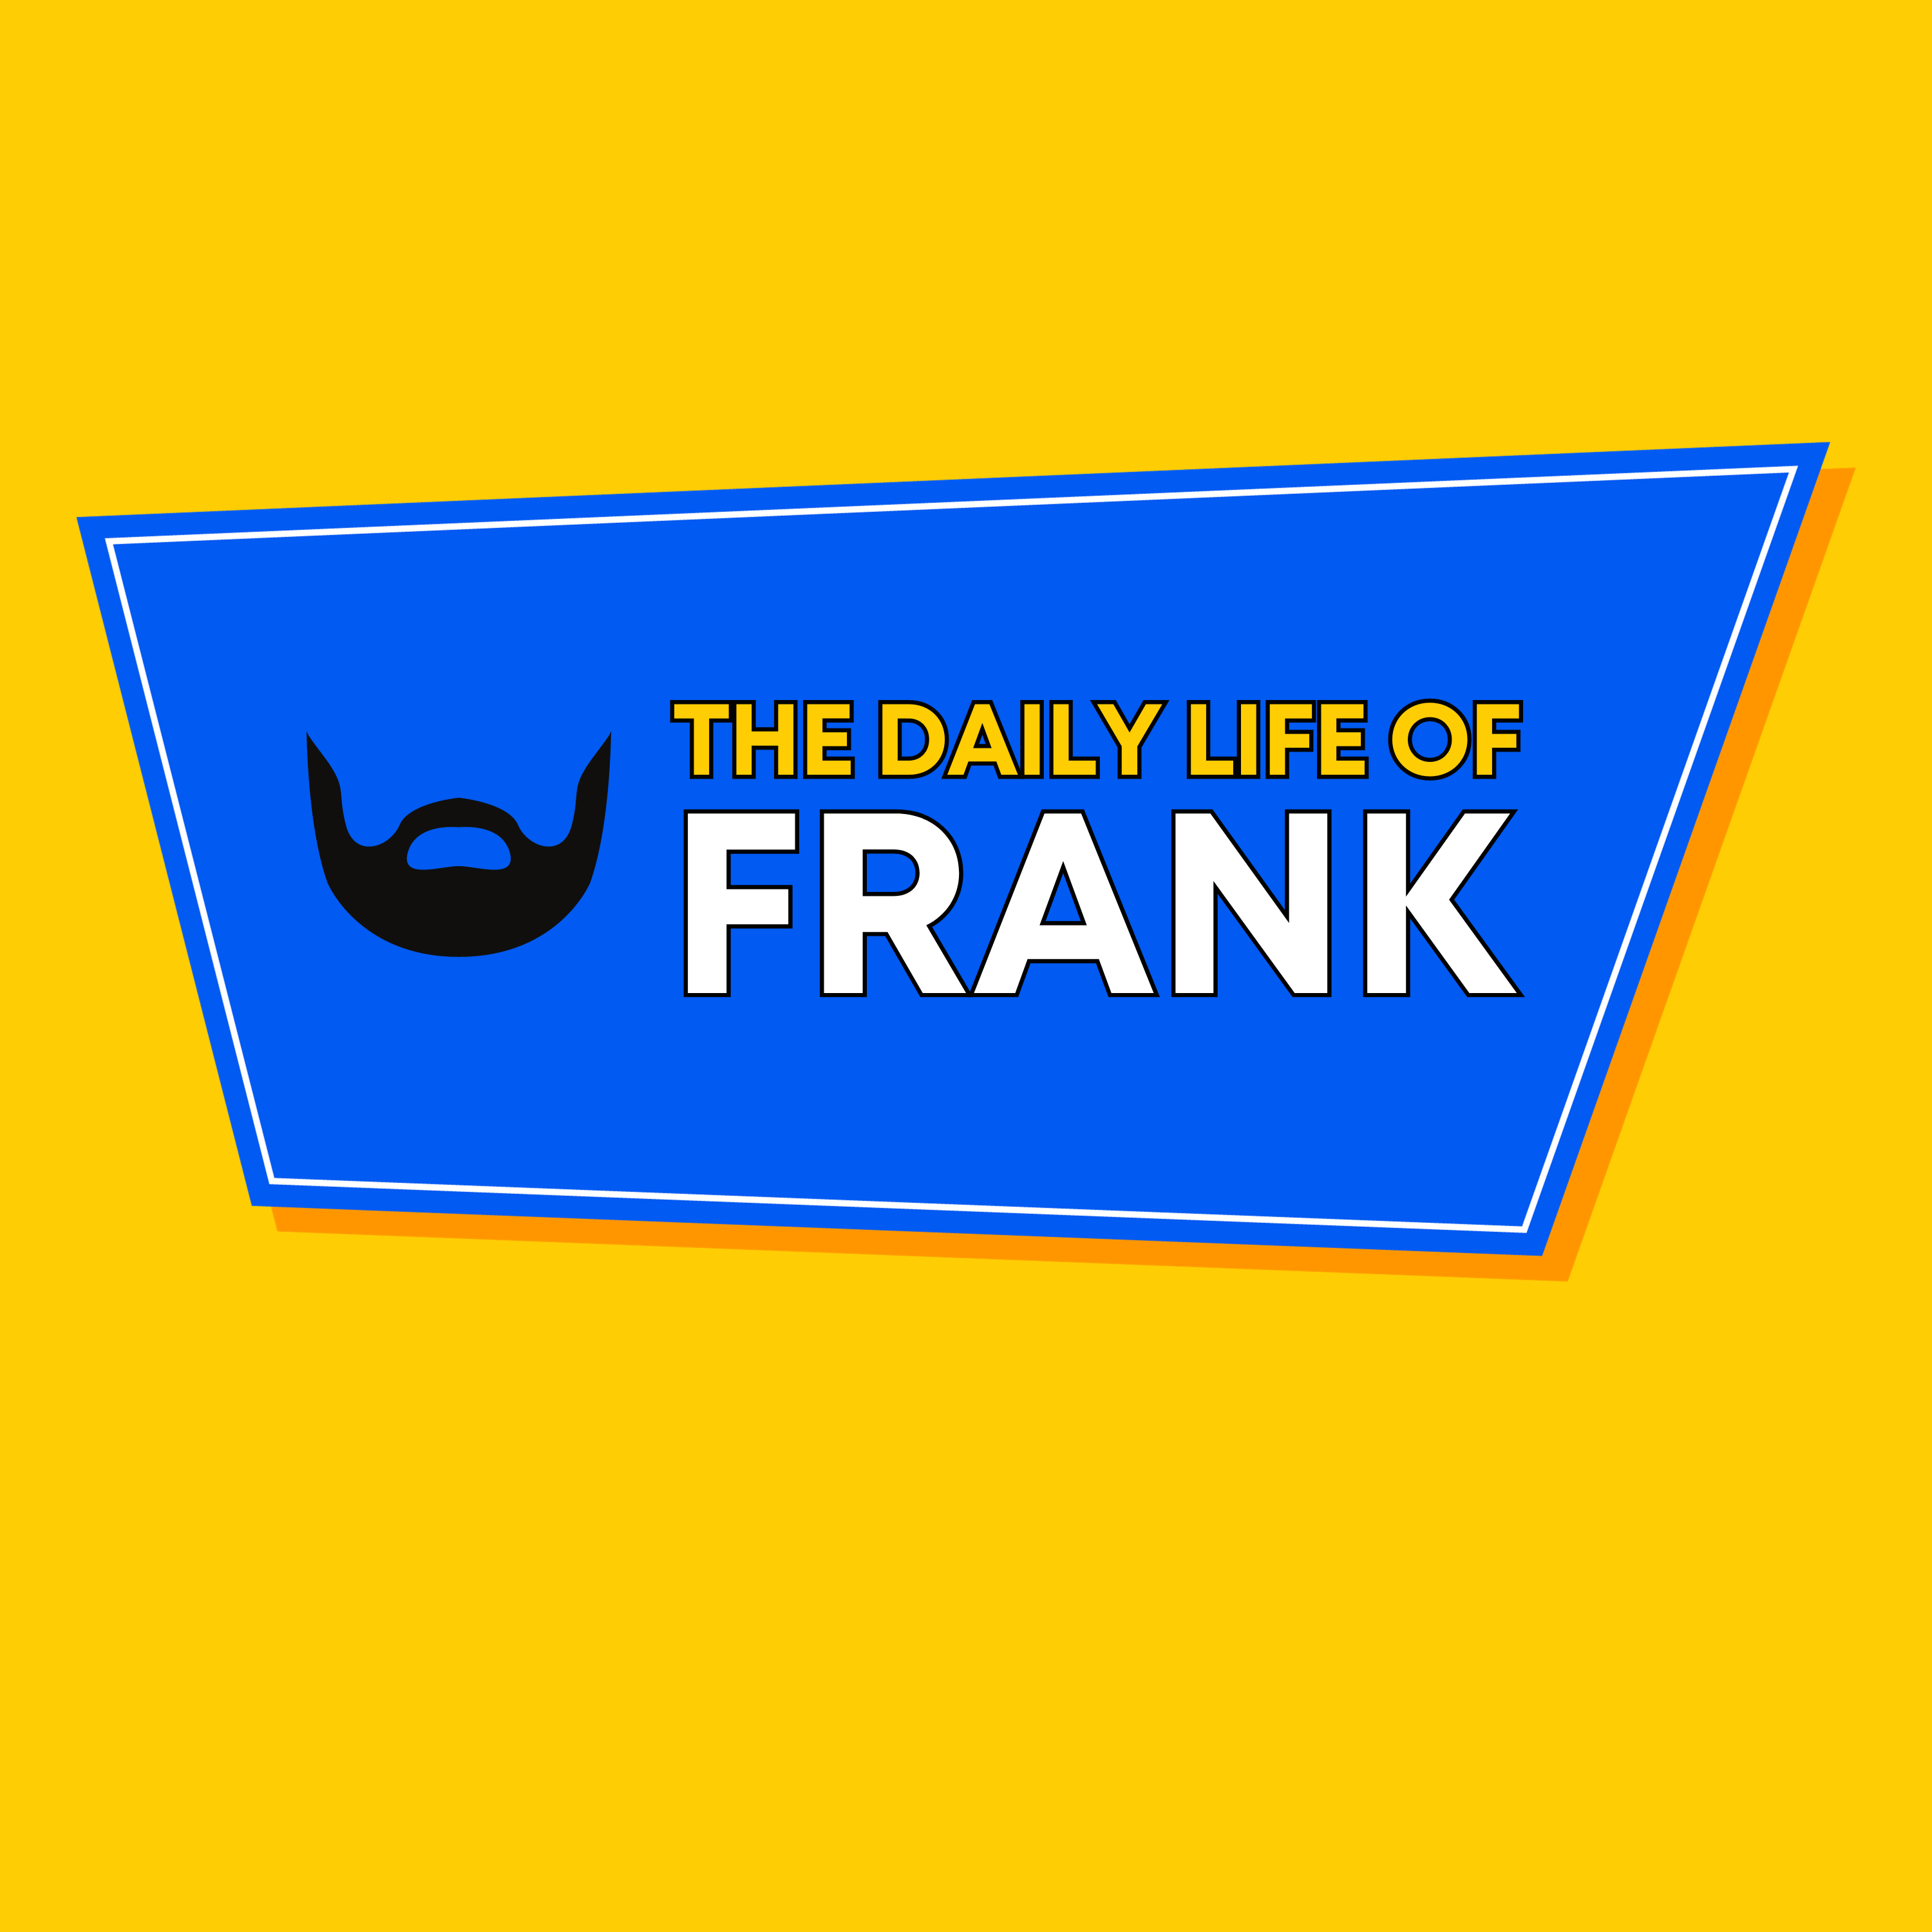 The Daily Life of Frank logo